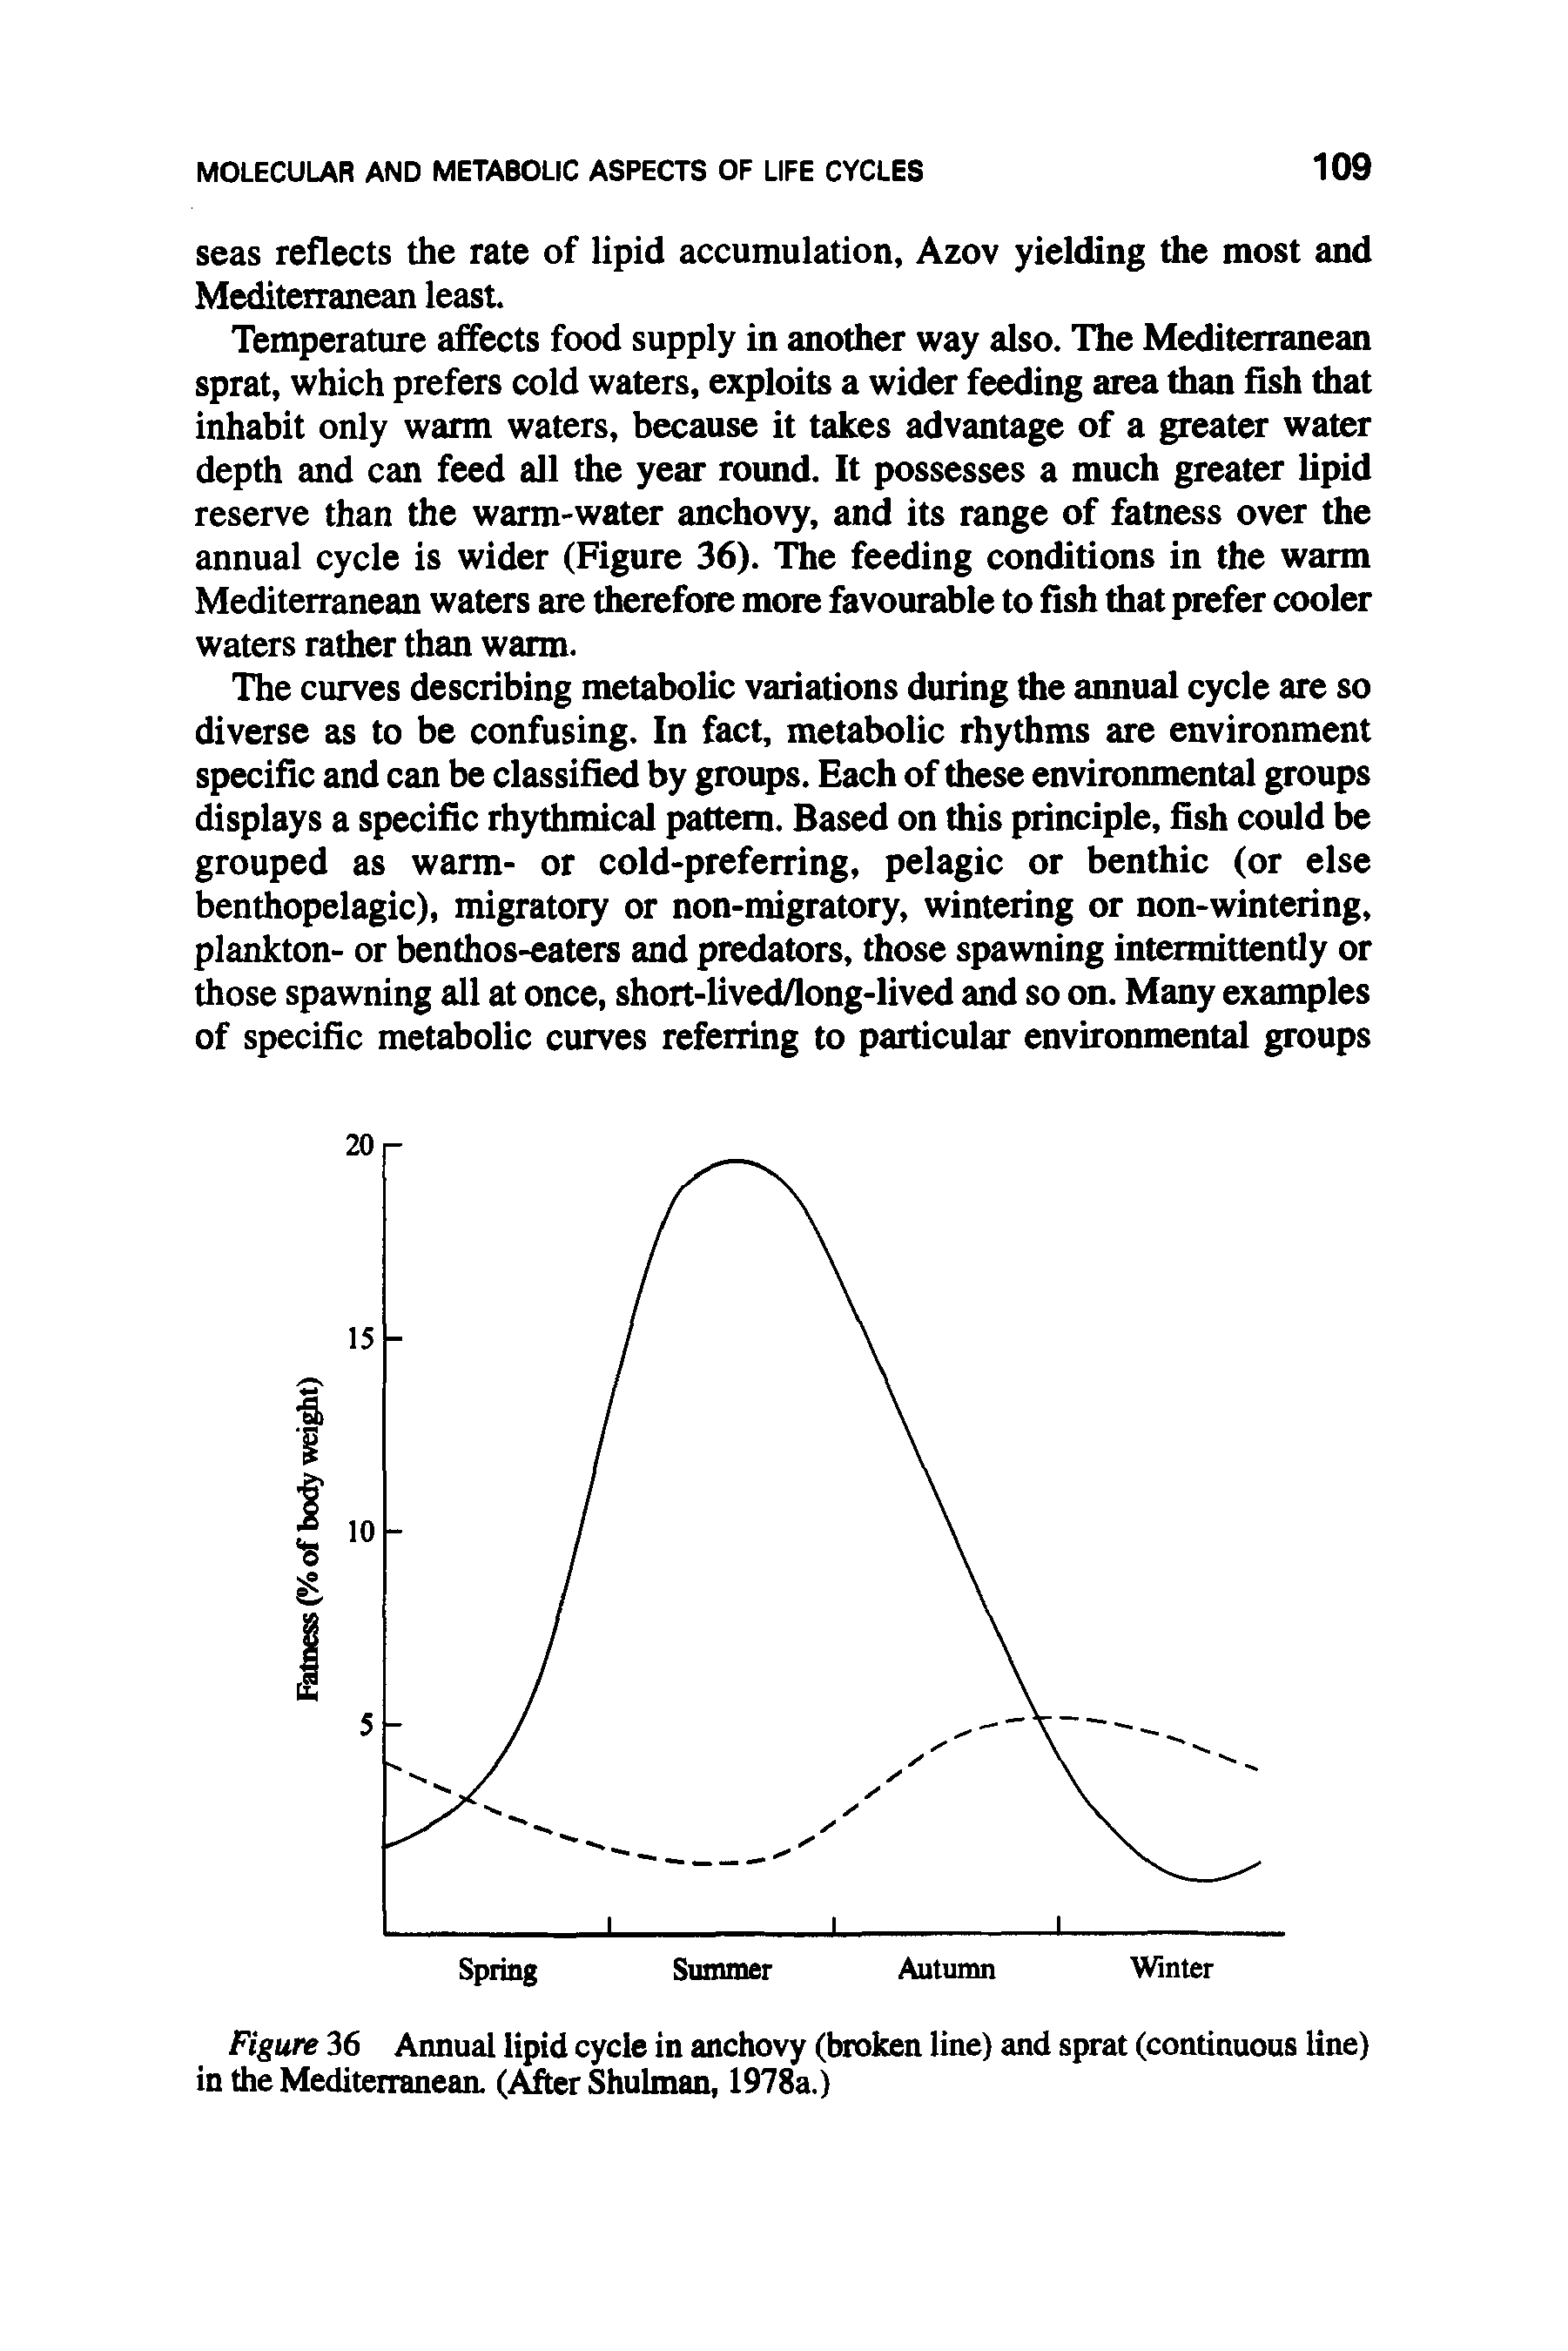 Figure 36 Annual lipid cycle in anchovy (broken line) and sprat (continuous line) in the Mediterranean. (After Shulman, 1978a.)...